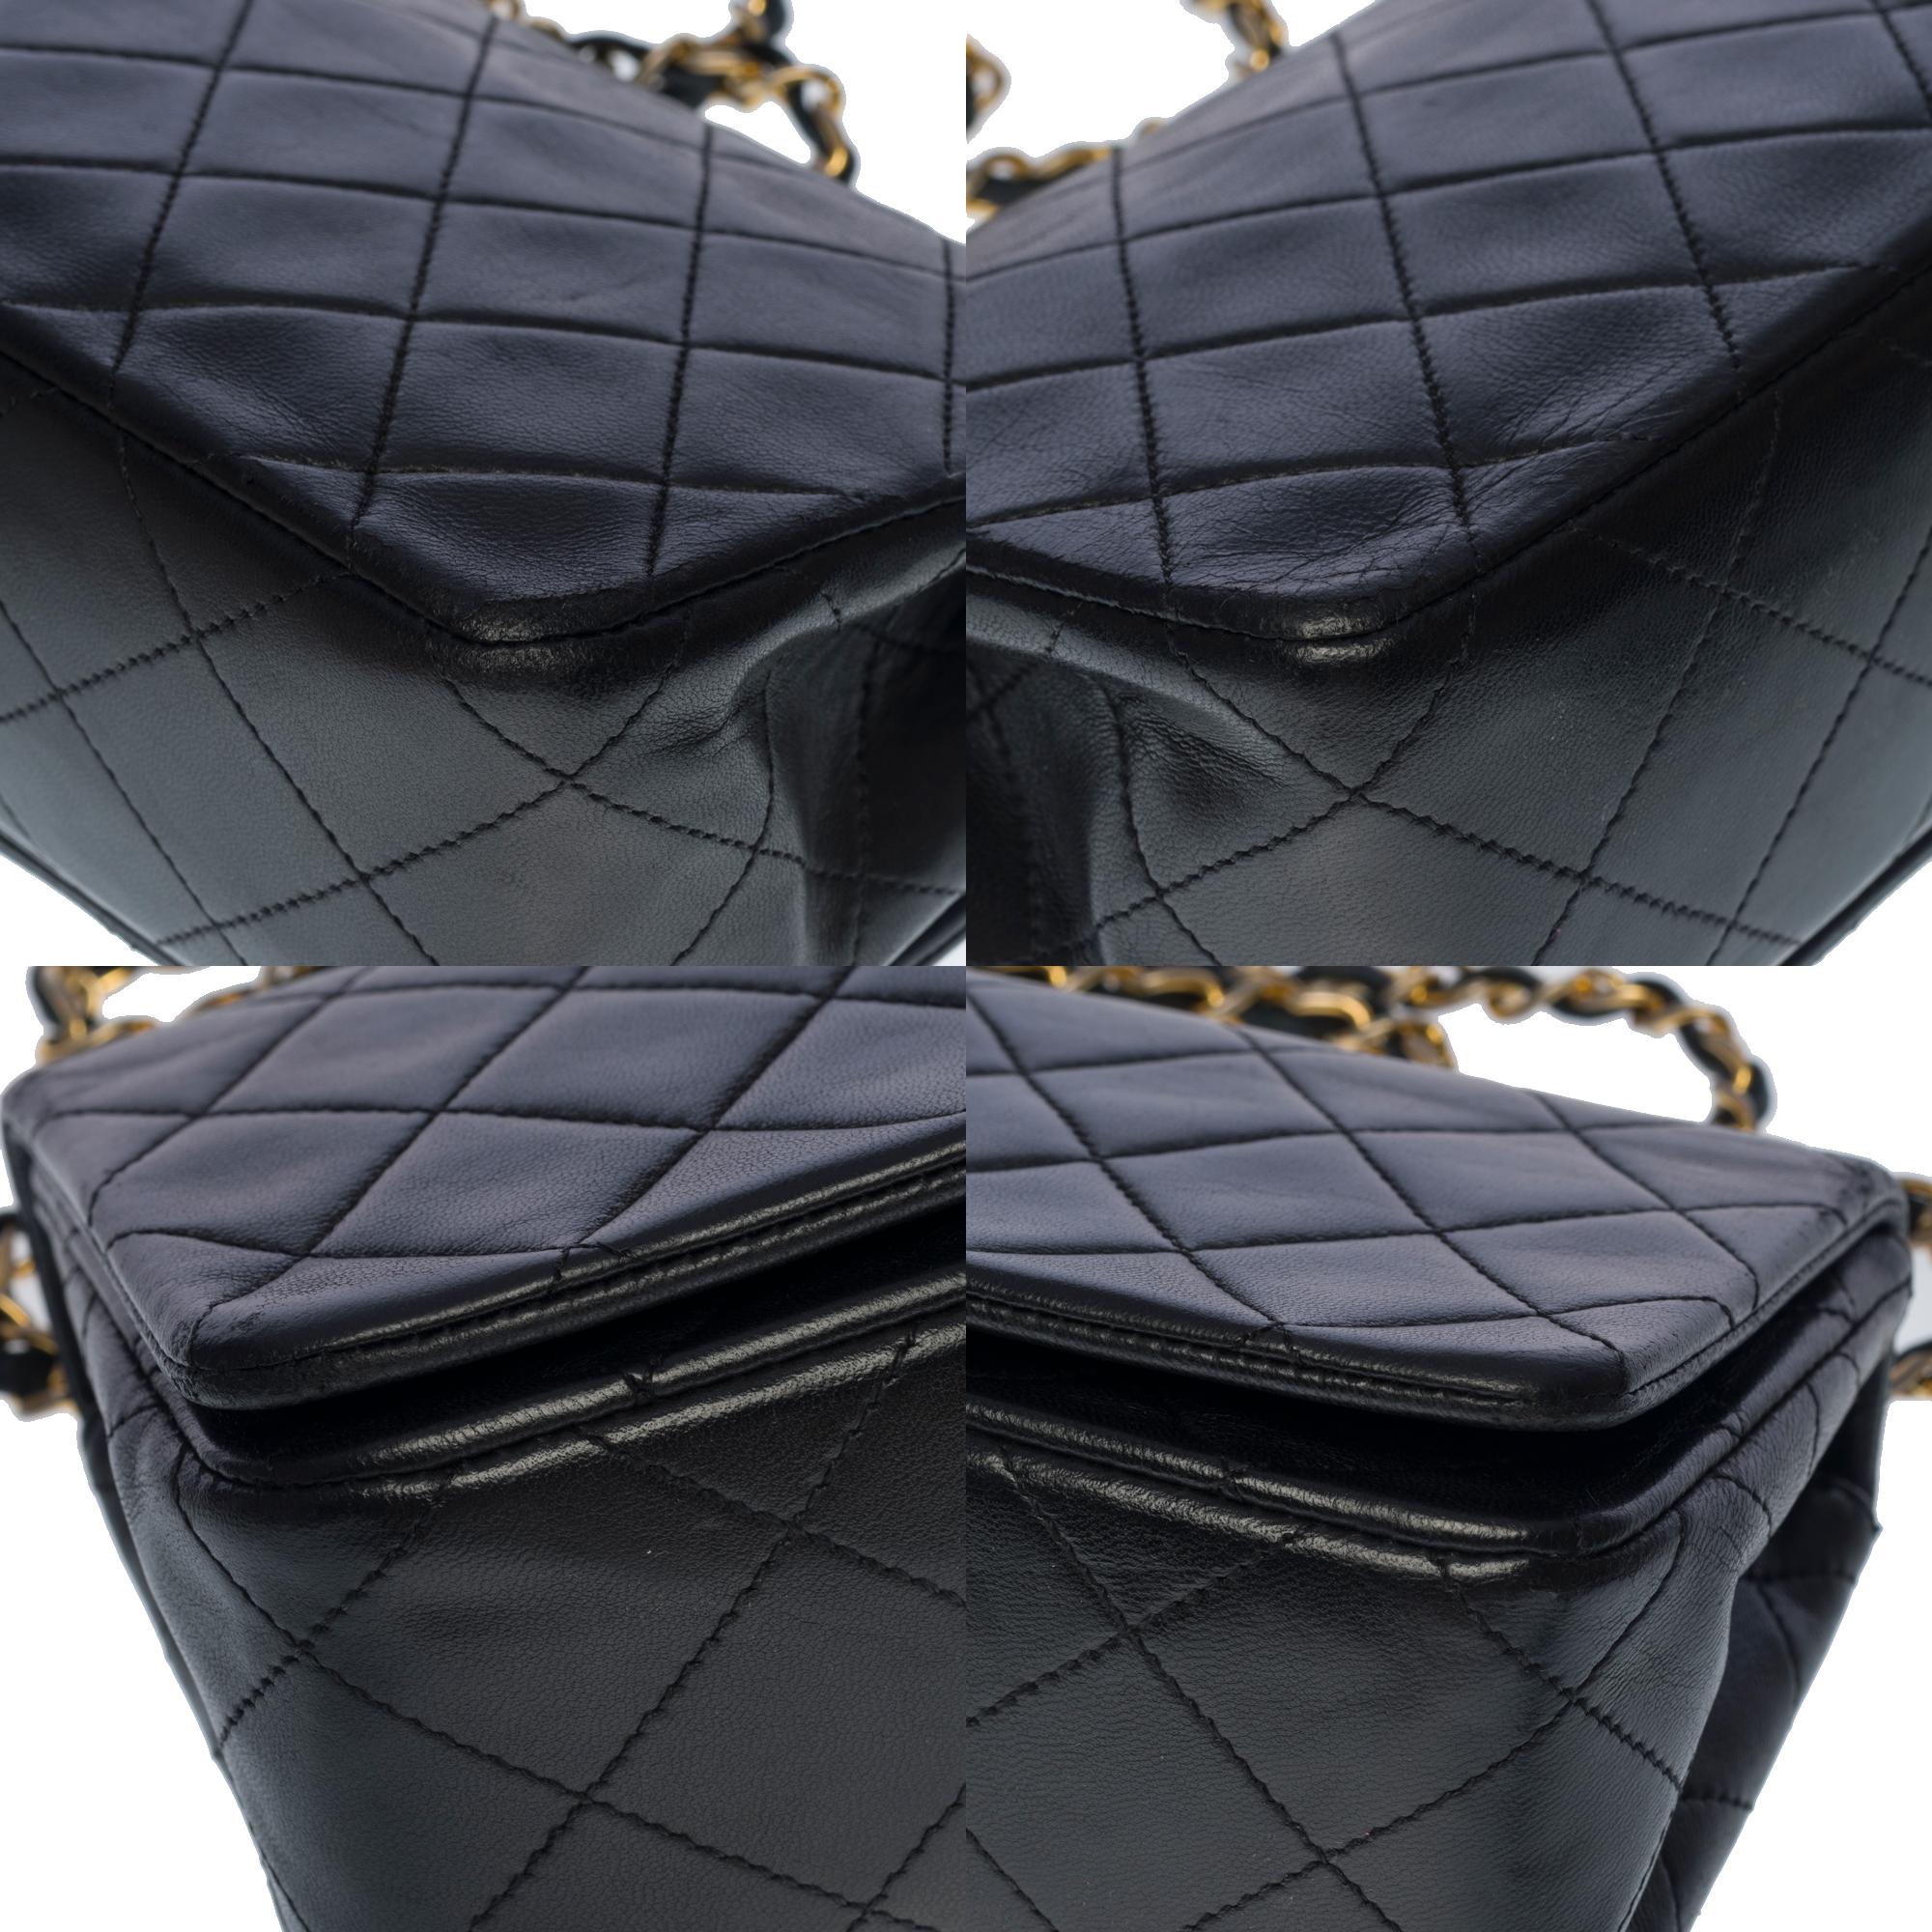 Chanel Classic Mini Full Flap shoulder bag in black quilted lambskin leather, GHW 6